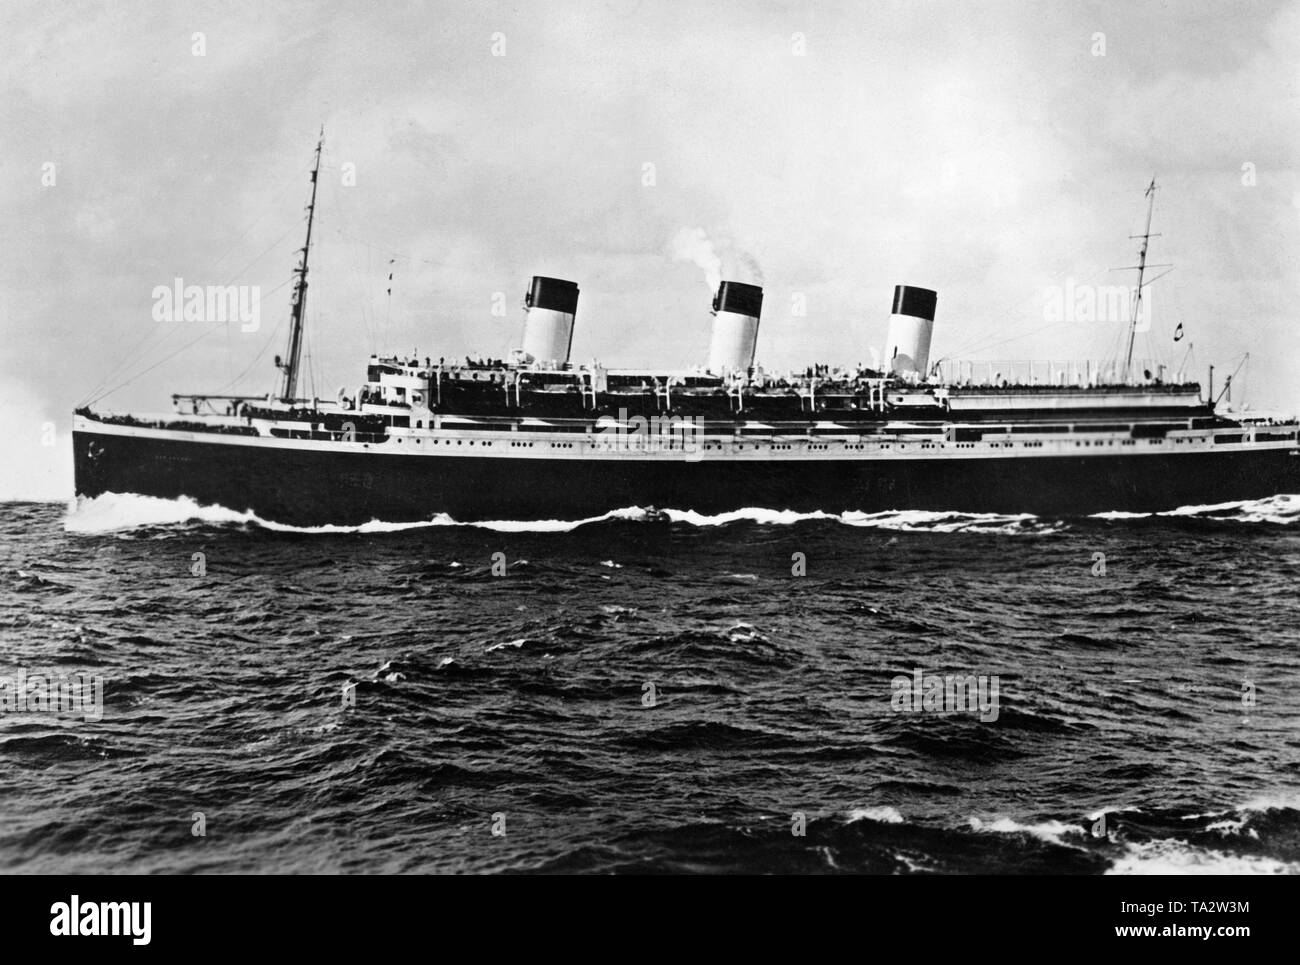 The ocean liner "Cap Arcona" of the shipping company Hamburg Sued under steam at sea. Stock Photo